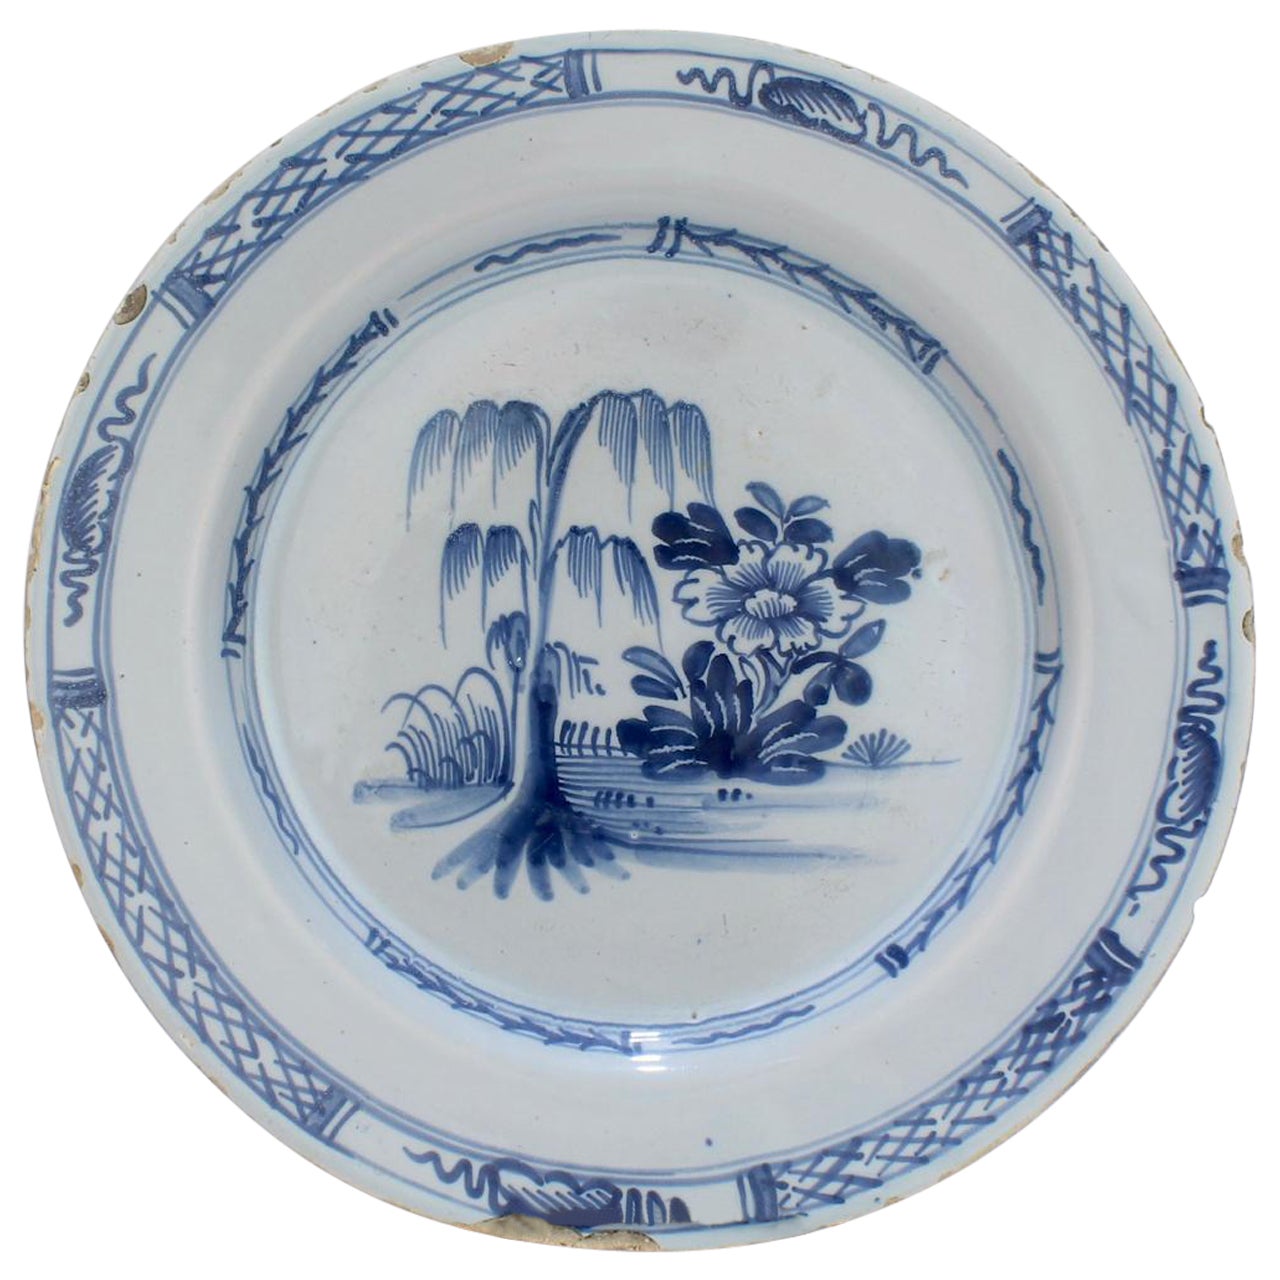 Antique 18th C English Delft Chinoiserie Plate with Willow Tree & Lotus Bush